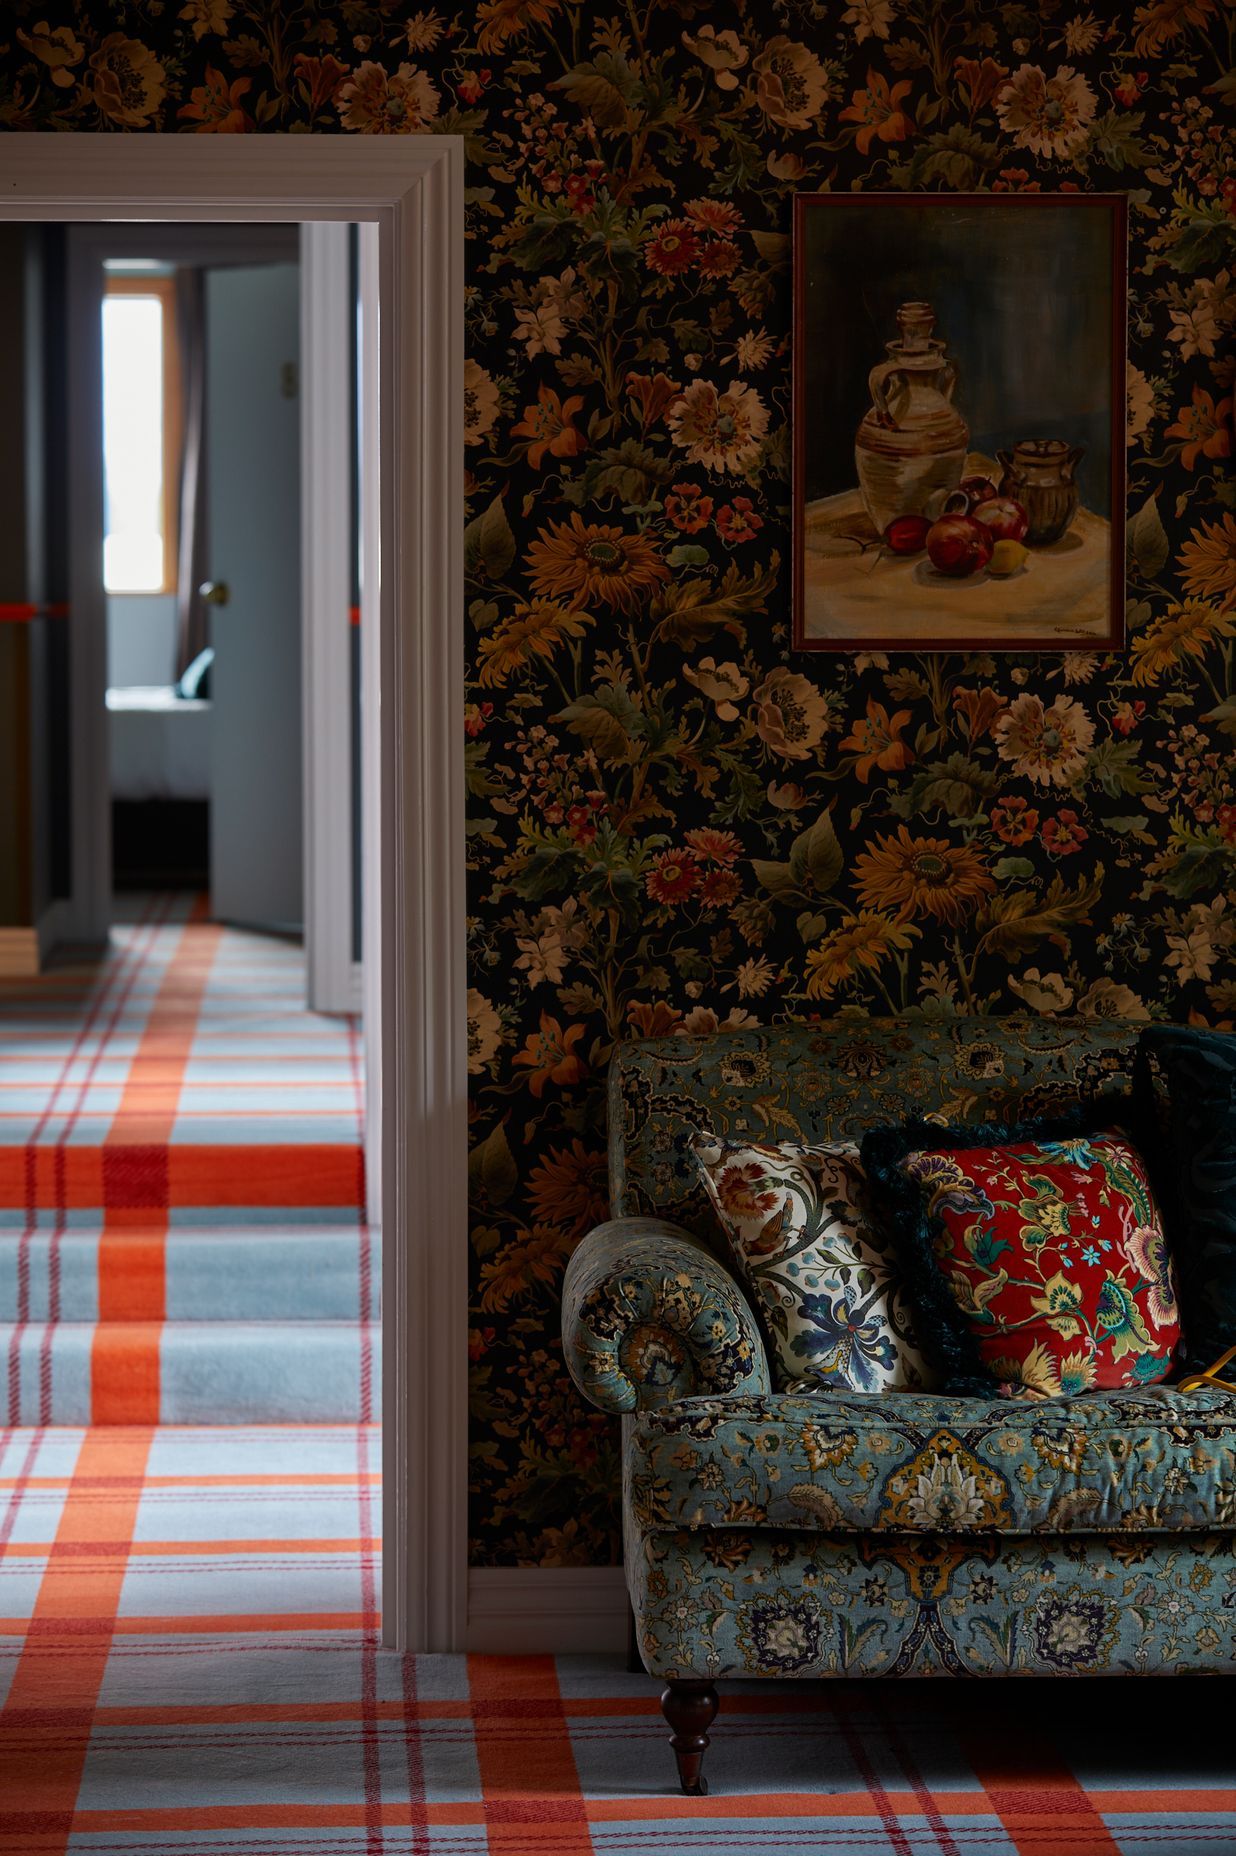 Colours and patterns combine in 'The Den'.